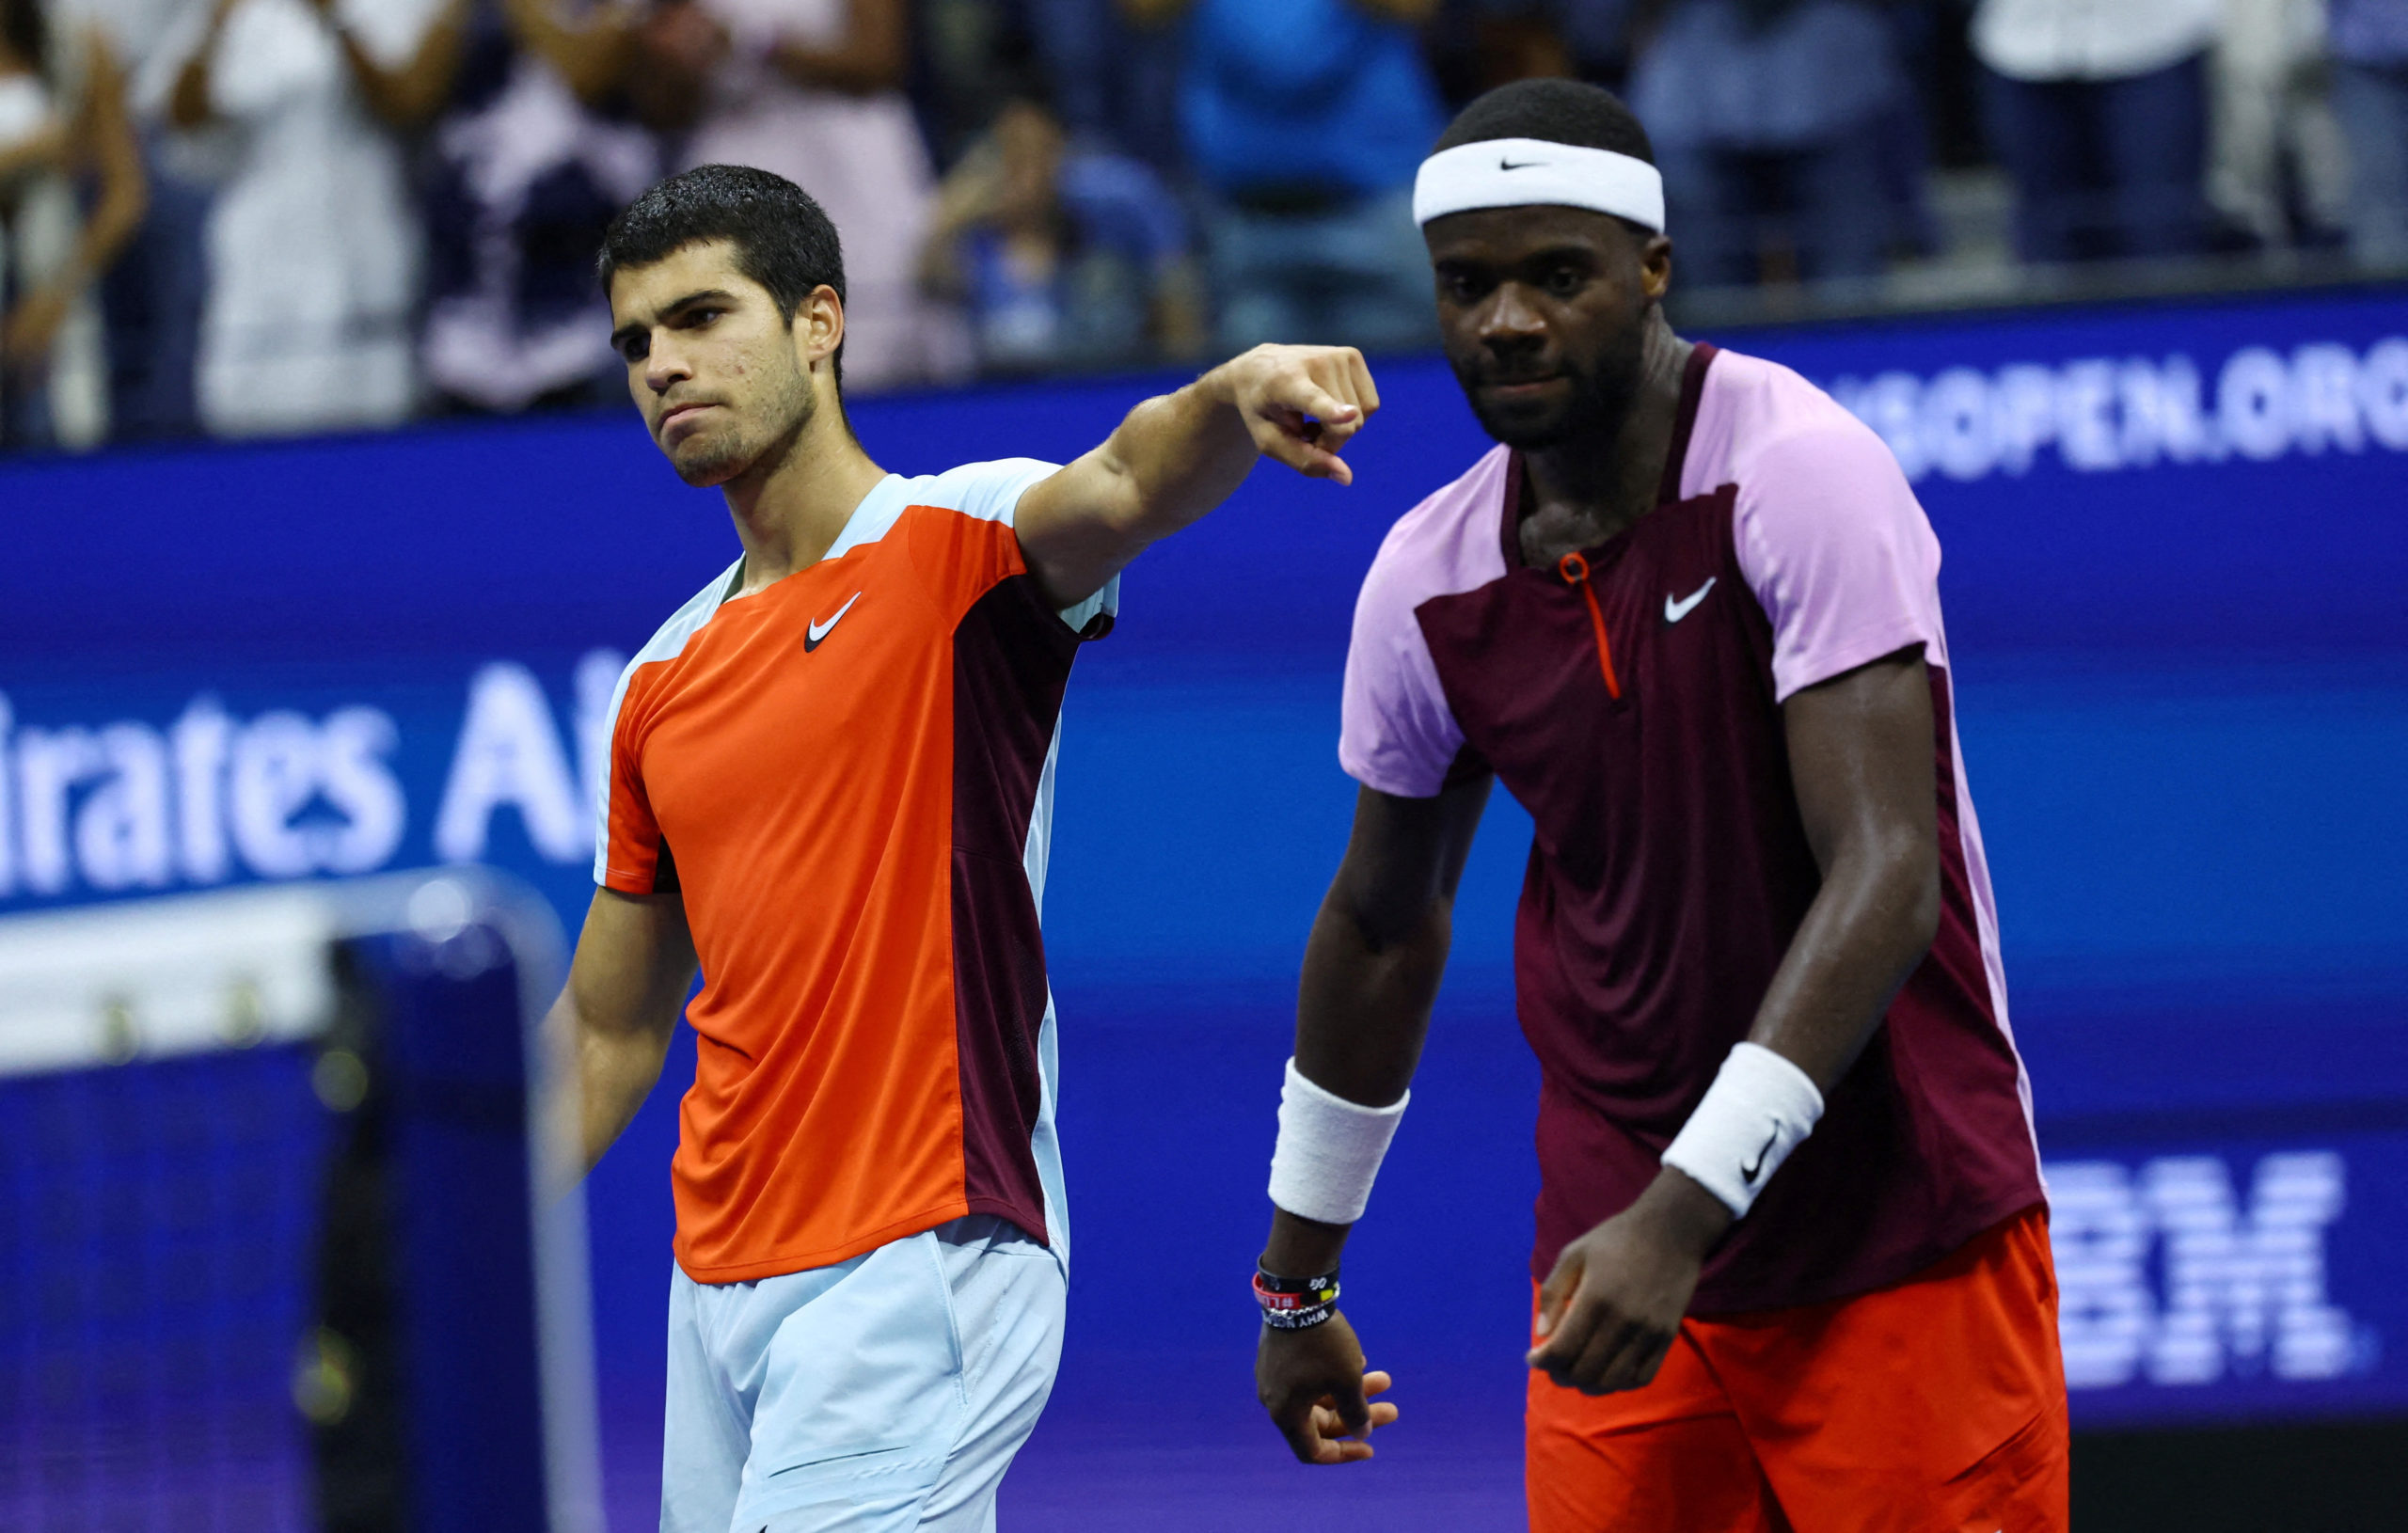 Tennis - U.S. Open - Flushing Meadows, New York, United States - September 9, 2022 Spain's Carlos Alcaraz with Frances Tiafoe of the U.S. after winning their semi final match 